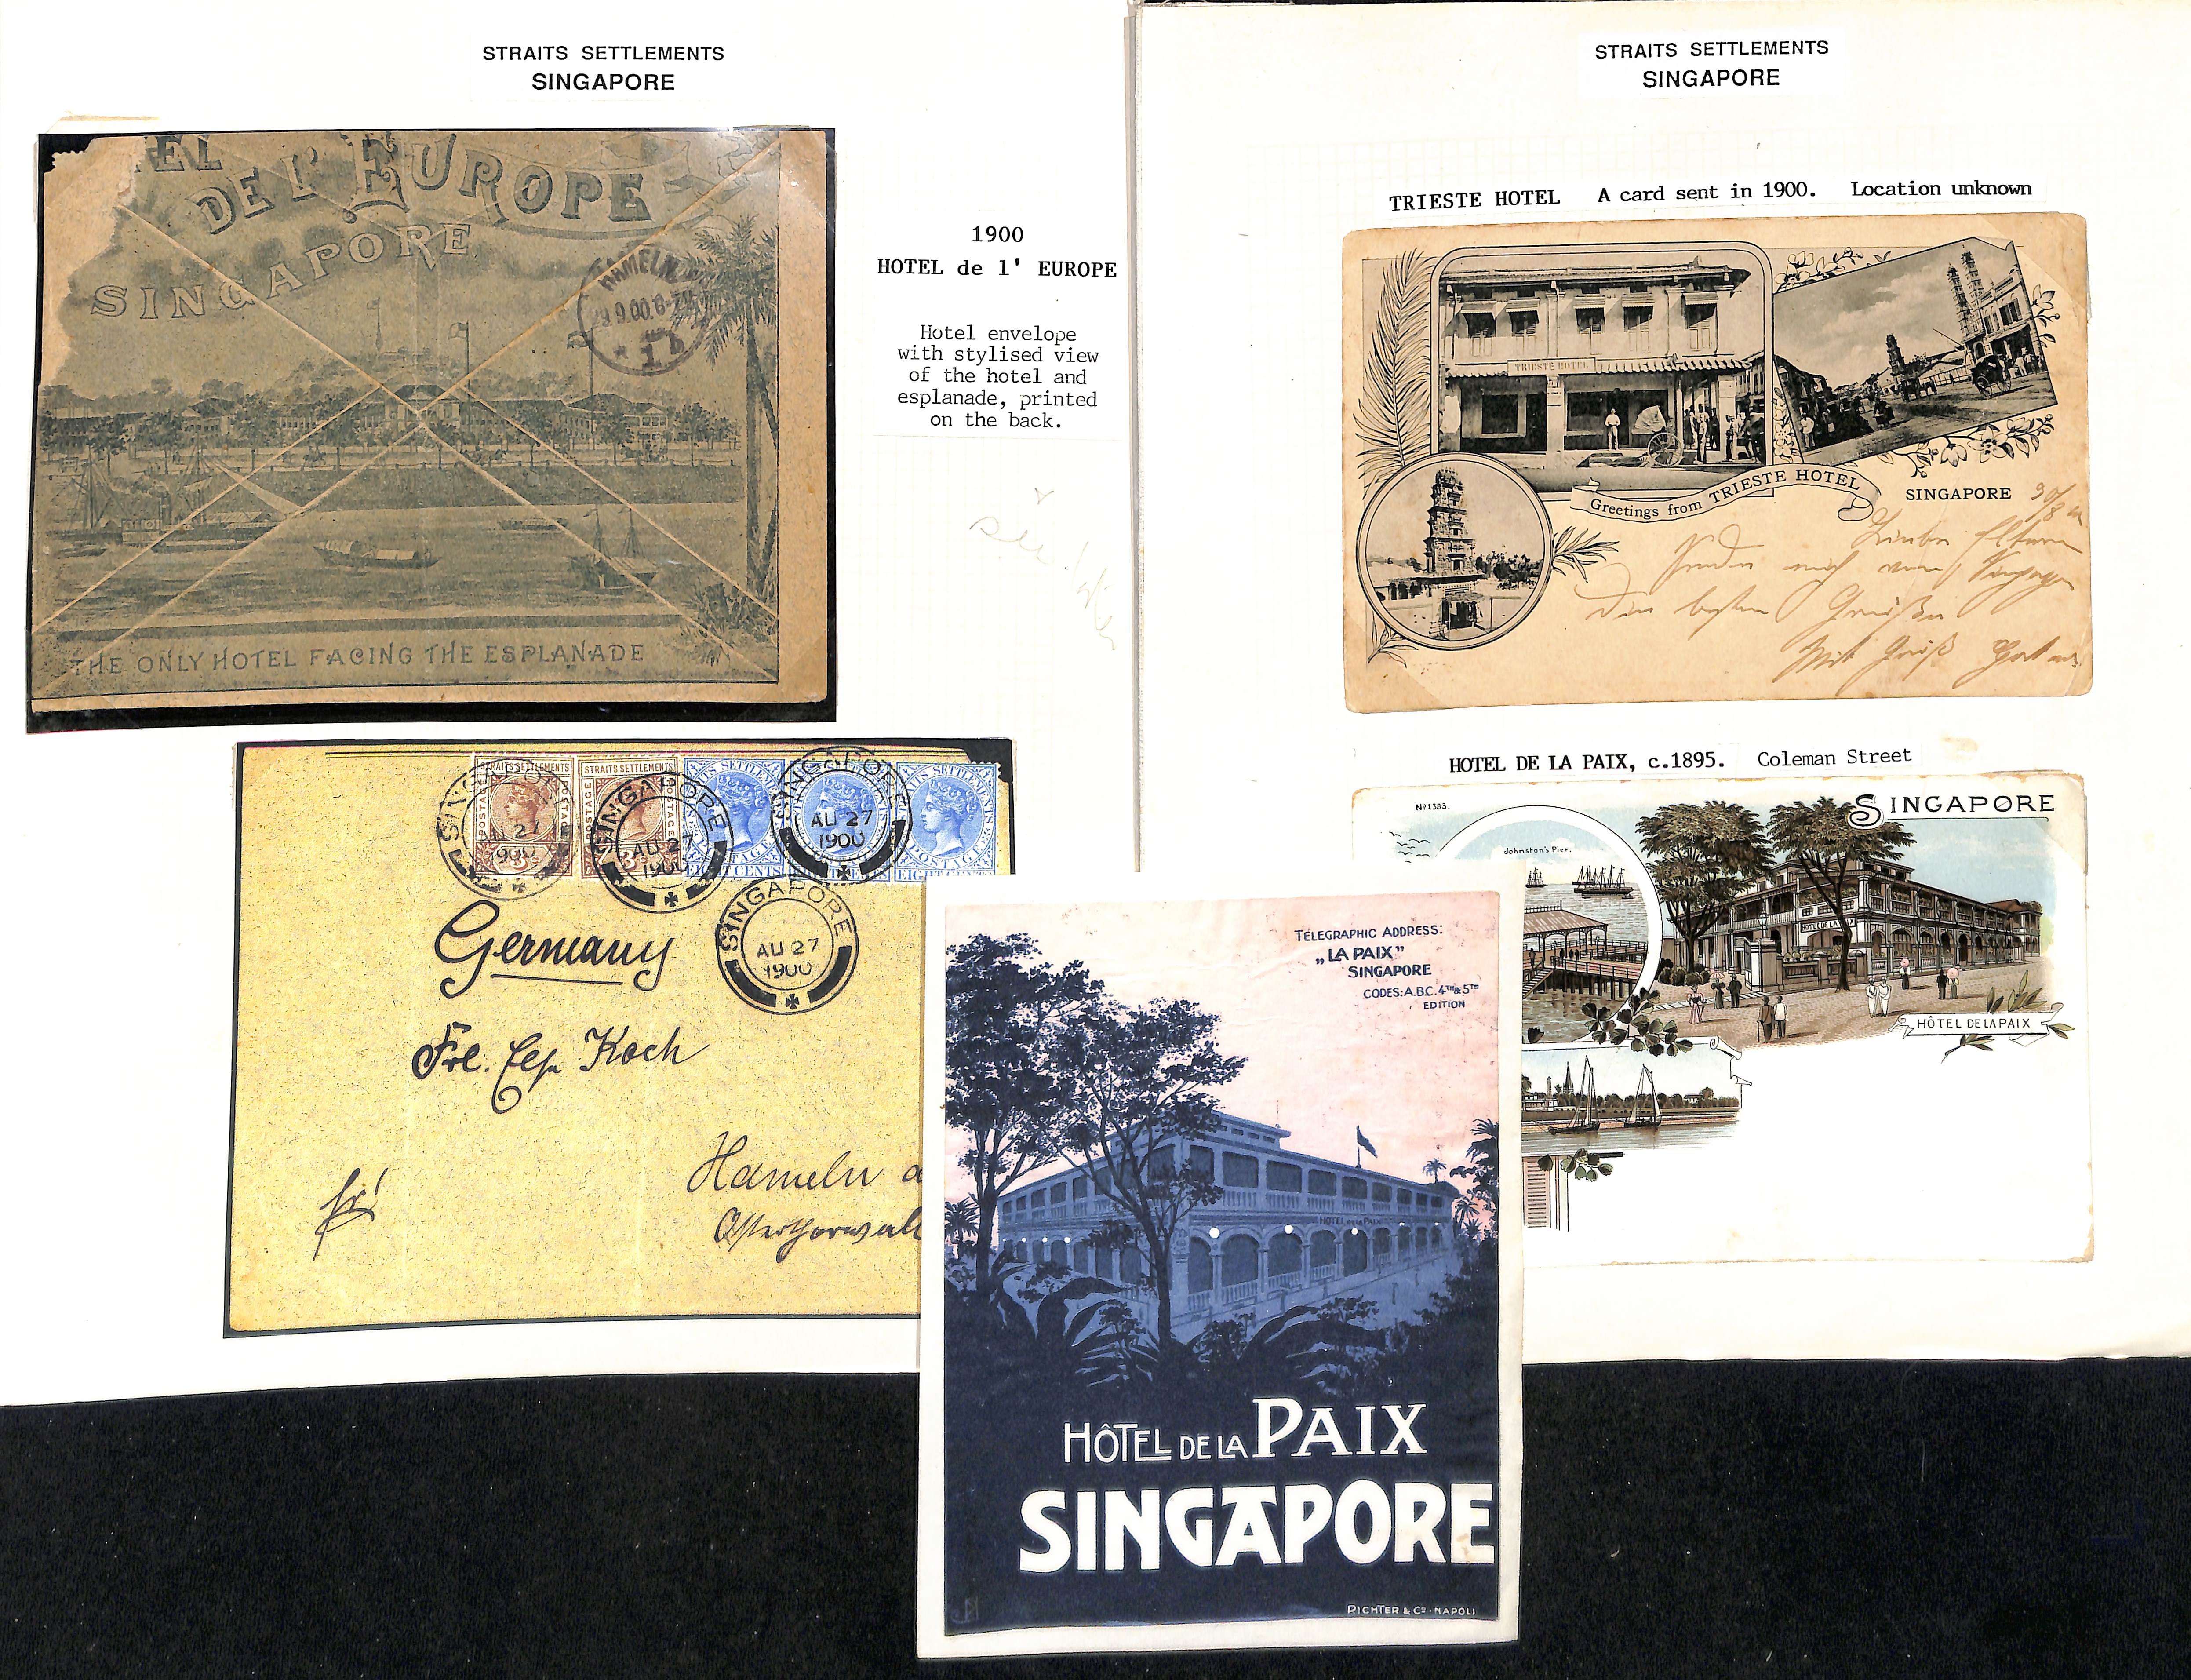 Hotels. 1900-85 Printed envelopes, picture postcards and ephemera from various Singapore hotels